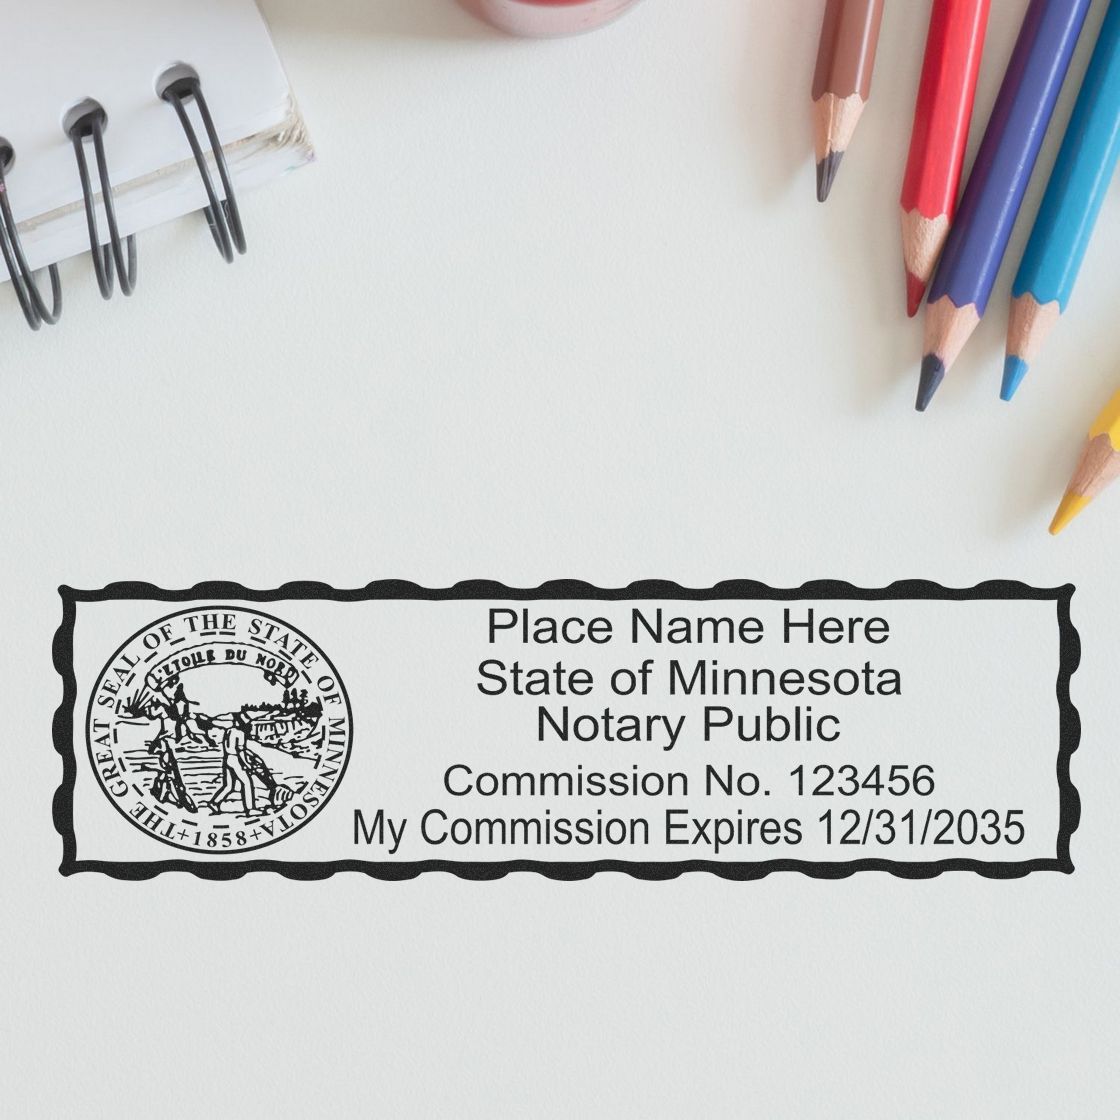 Another Example of a stamped impression of the Heavy-Duty Minnesota Rectangular Notary Stamp on a piece of office paper.